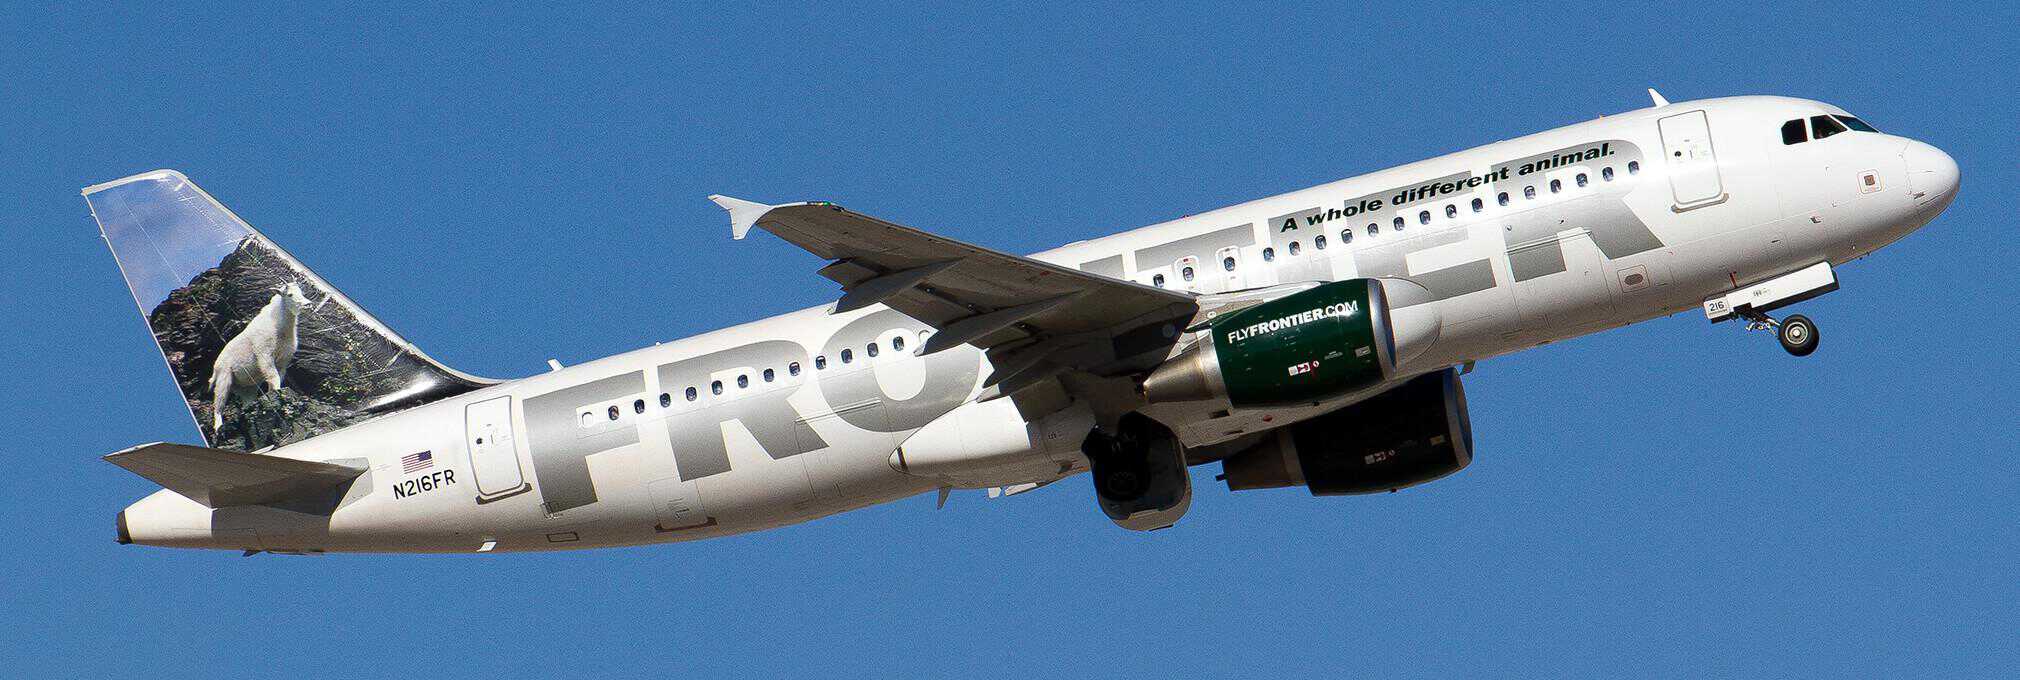 Frontier Airlines One-Way Flights JUST $25 (Book by June 17th!)